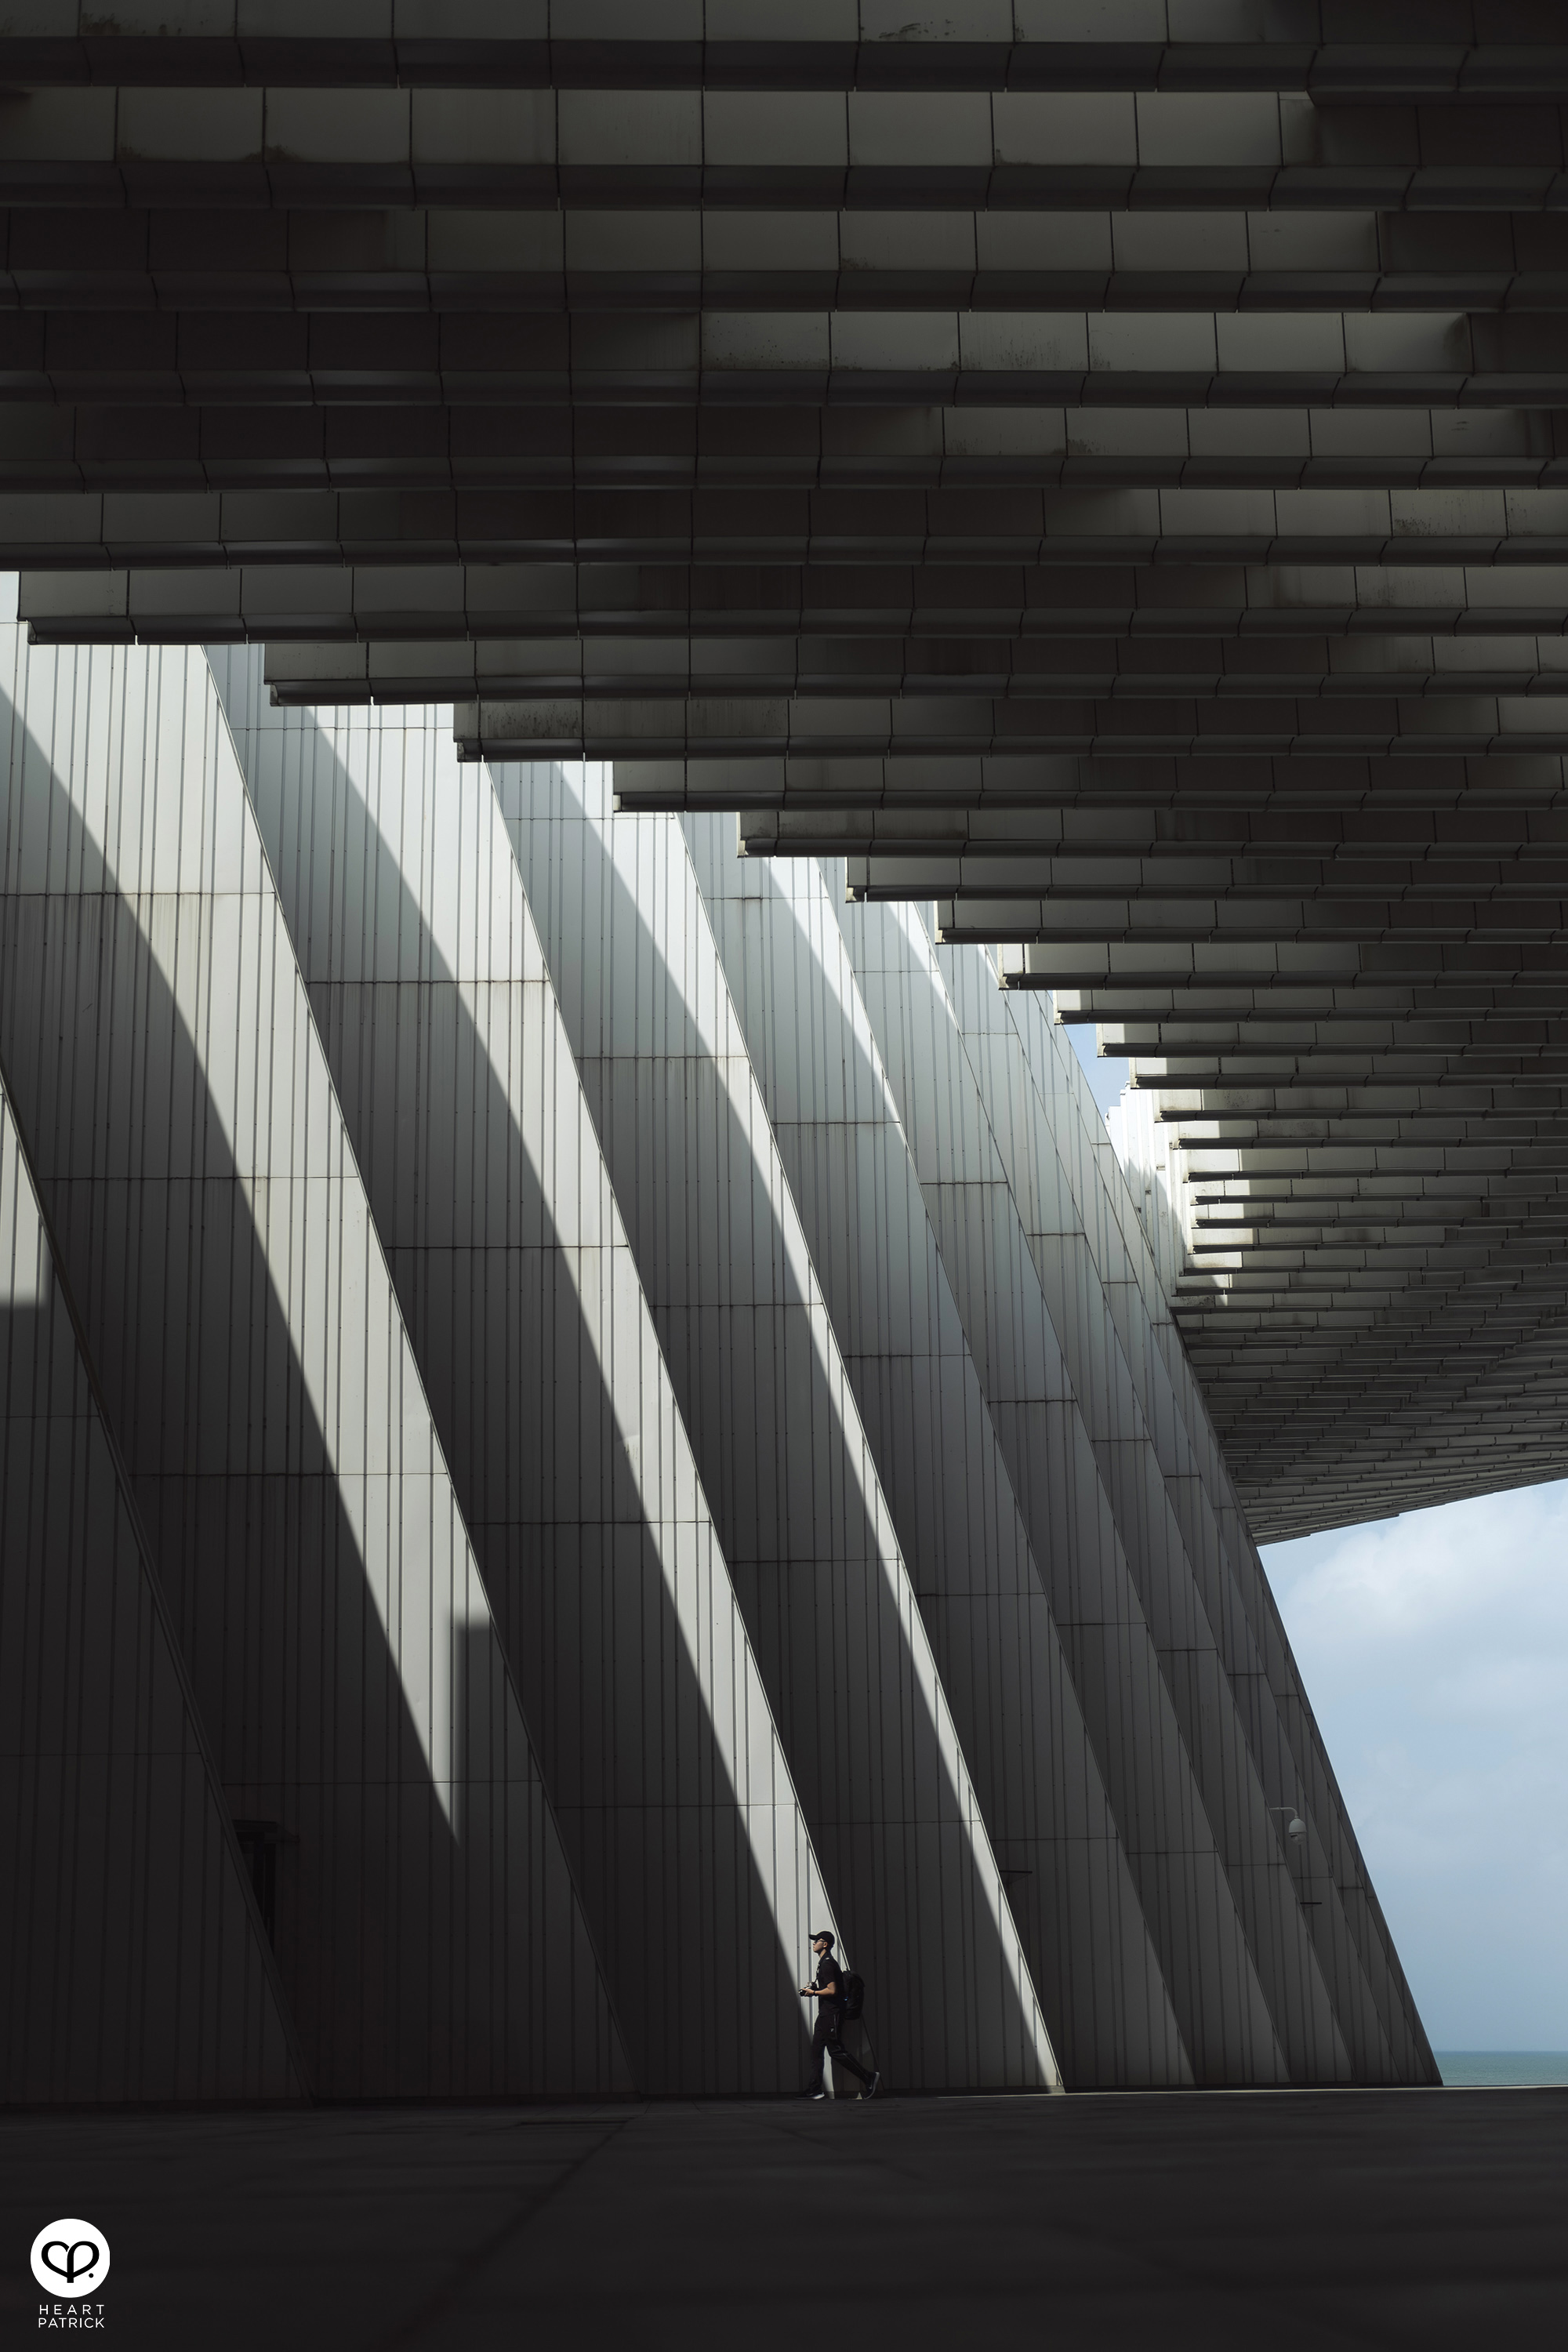 heartpatrick guangxi culture art center nanning gmp architects architecture photography